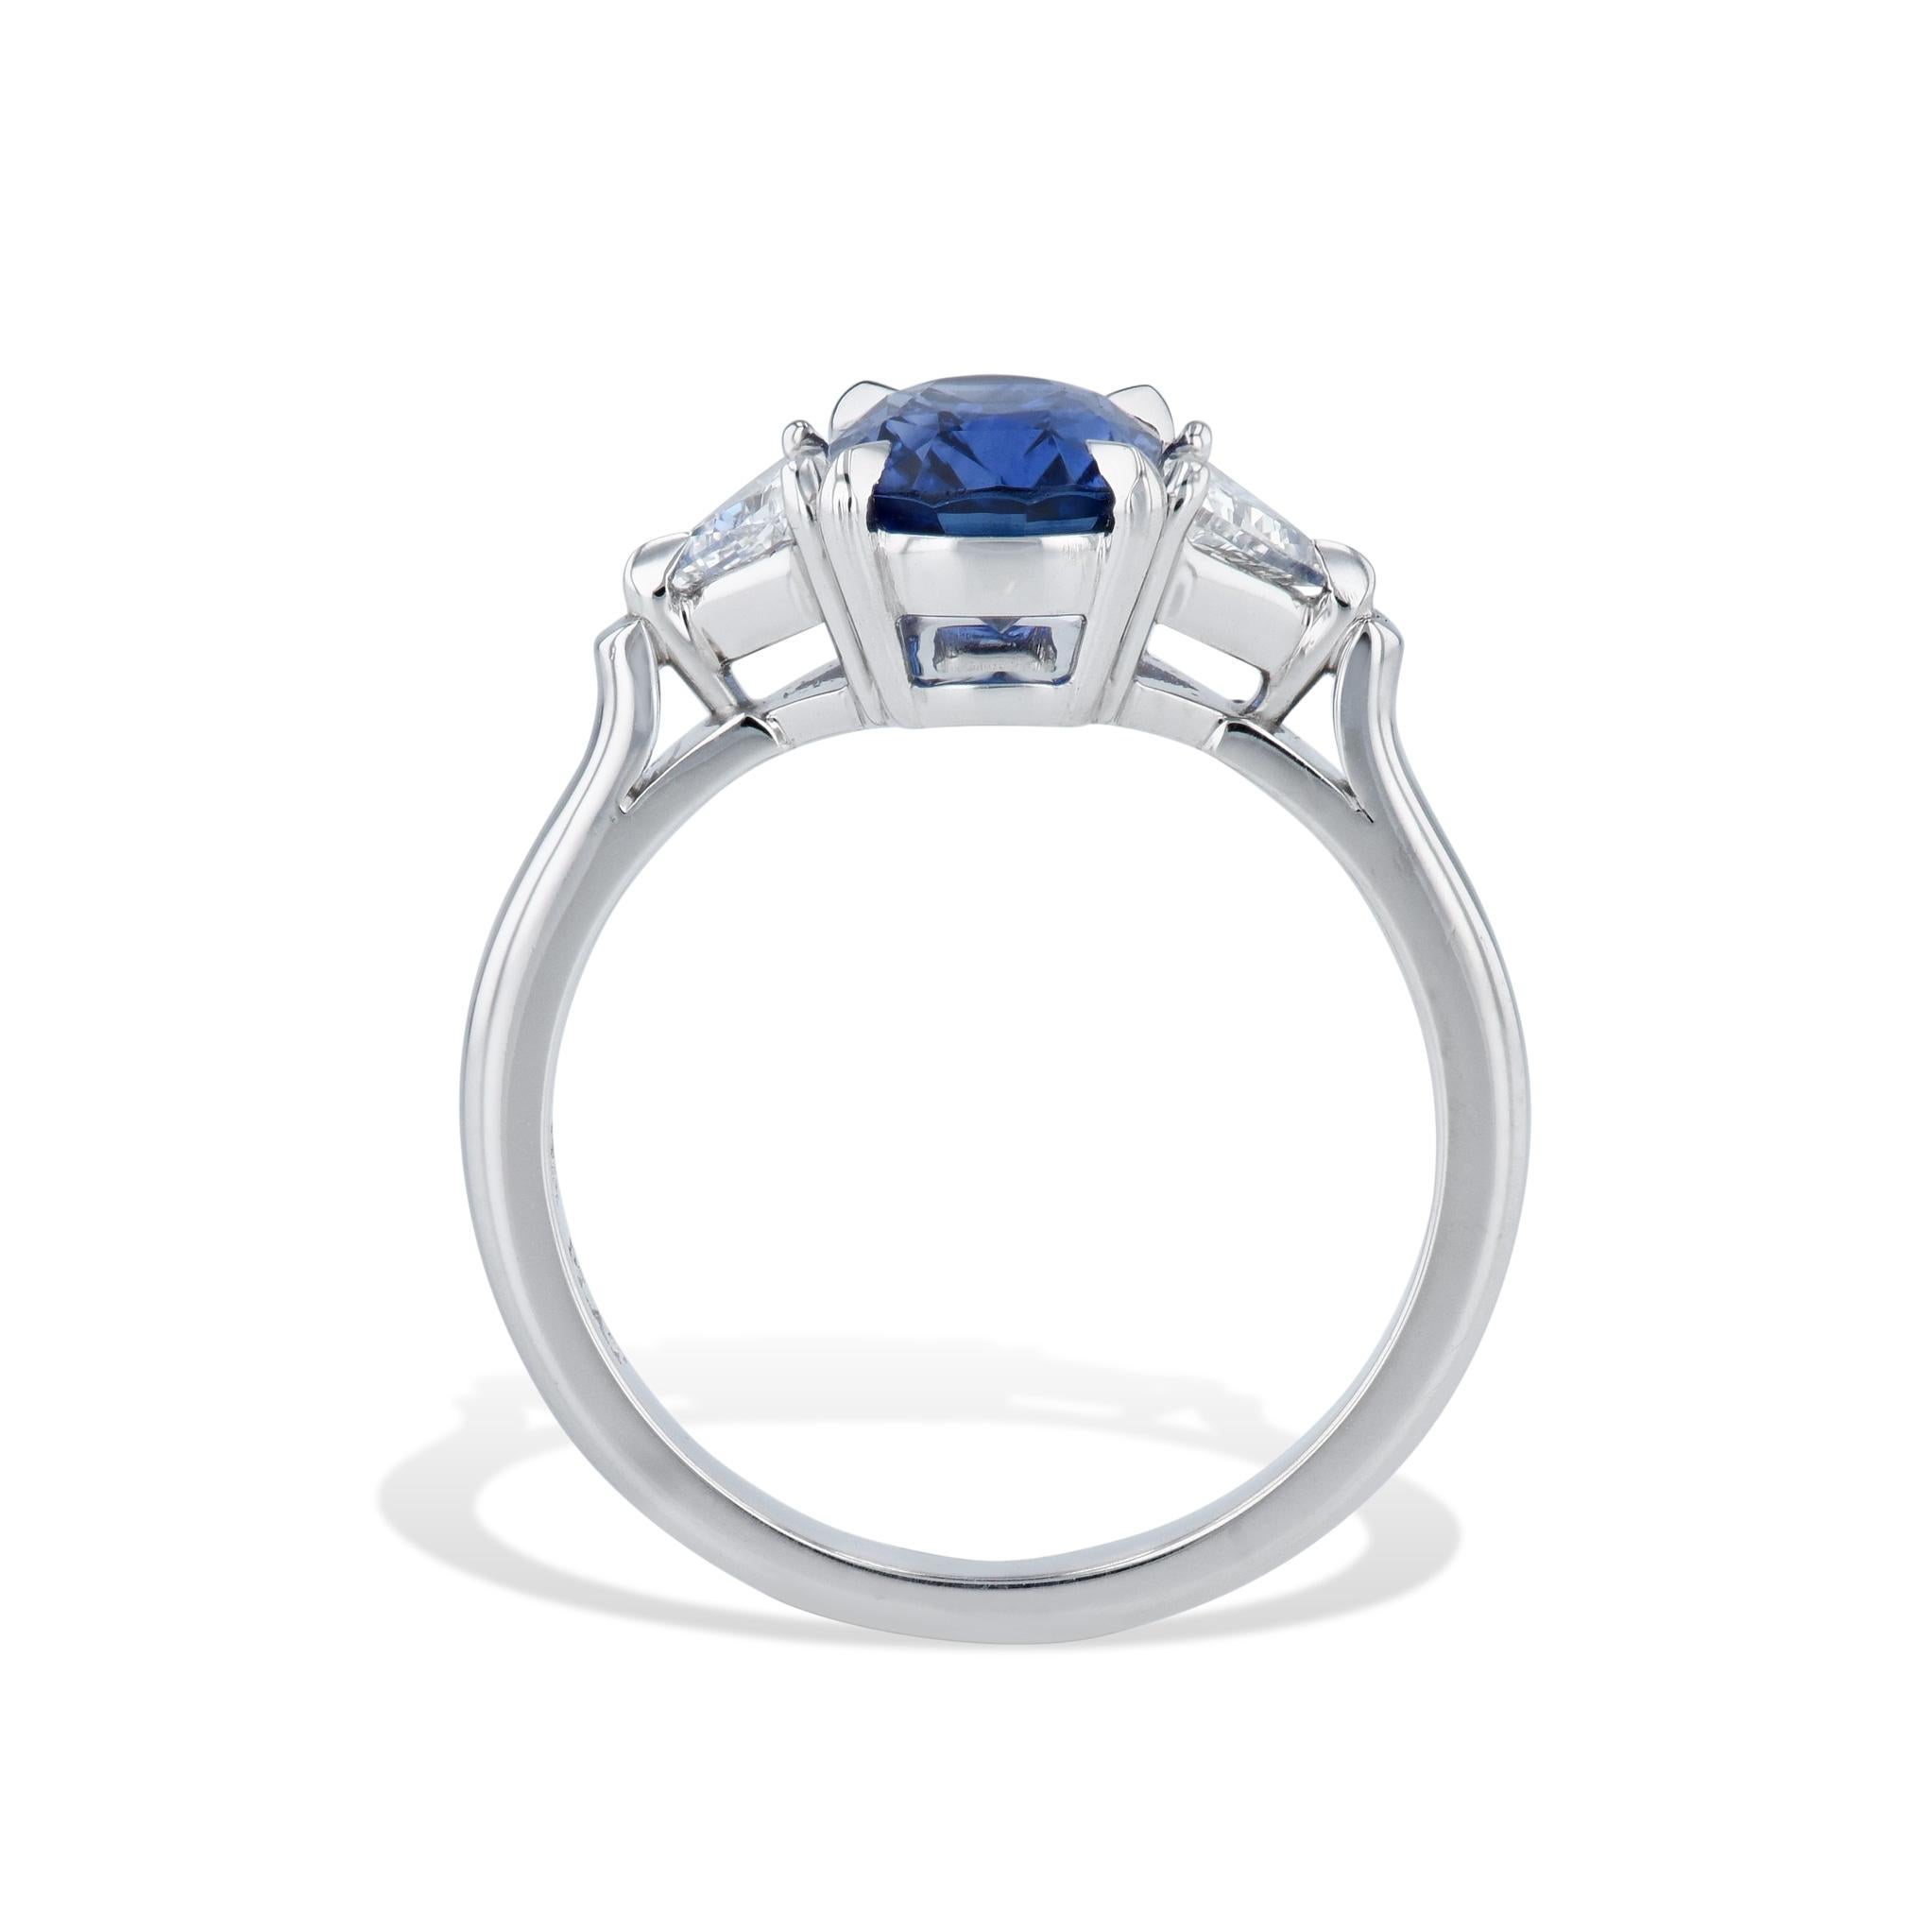 Awe-inspiring Madagascar Blue Sapphire Diamond Trillion Platinum Ring! 
Be mesmerized by a dazzling cushion cut Madagascar Blue Sapphire at the heart of this handmade HH Collection masterpiece. 
Complimented by Trillion Cut diamonds on either side,